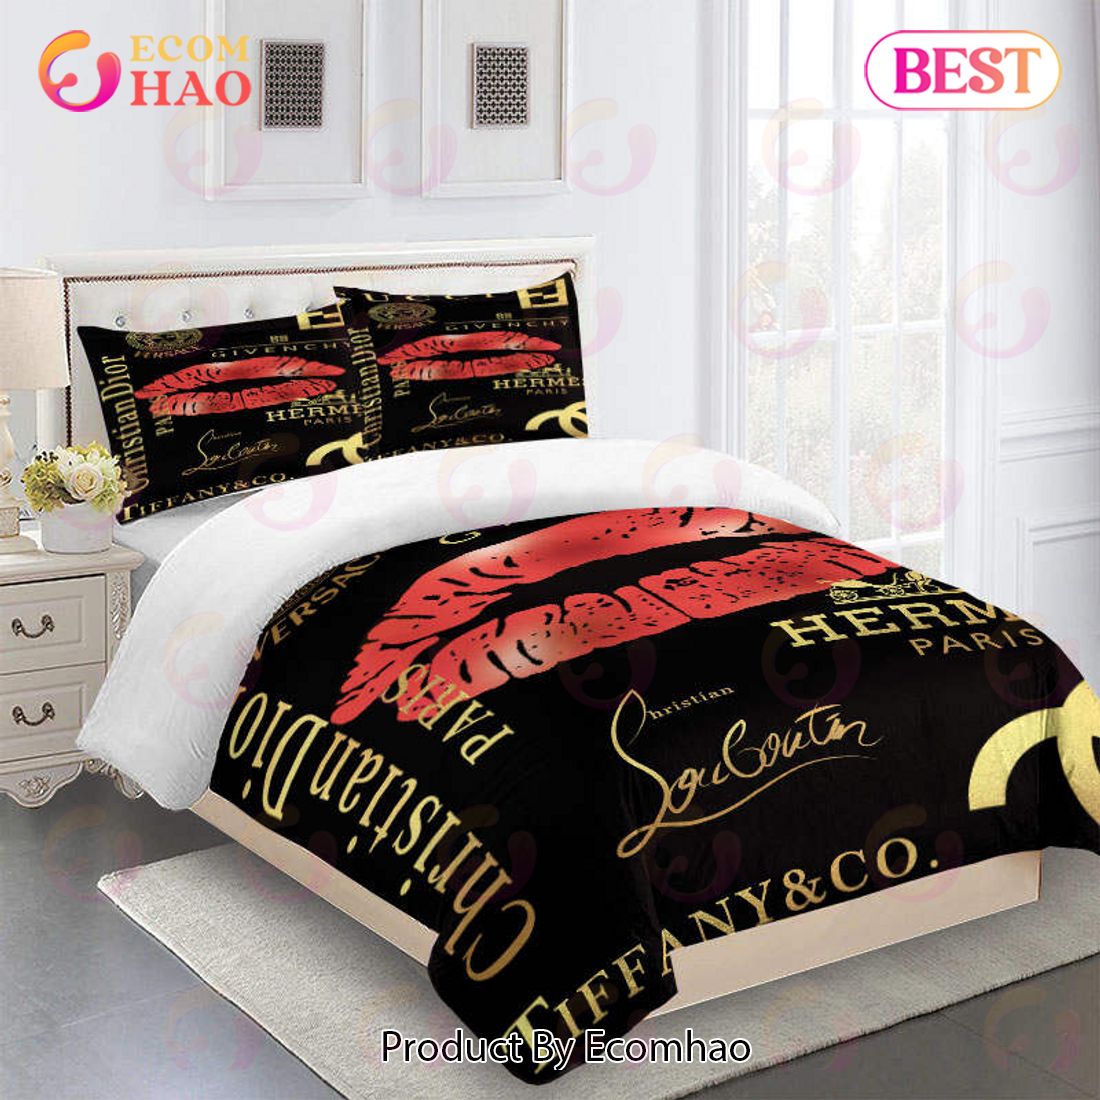 Gucci Bedding Set Christian Dior Luxury Duvet Cover Bedding Sets - Ecomhao  Store